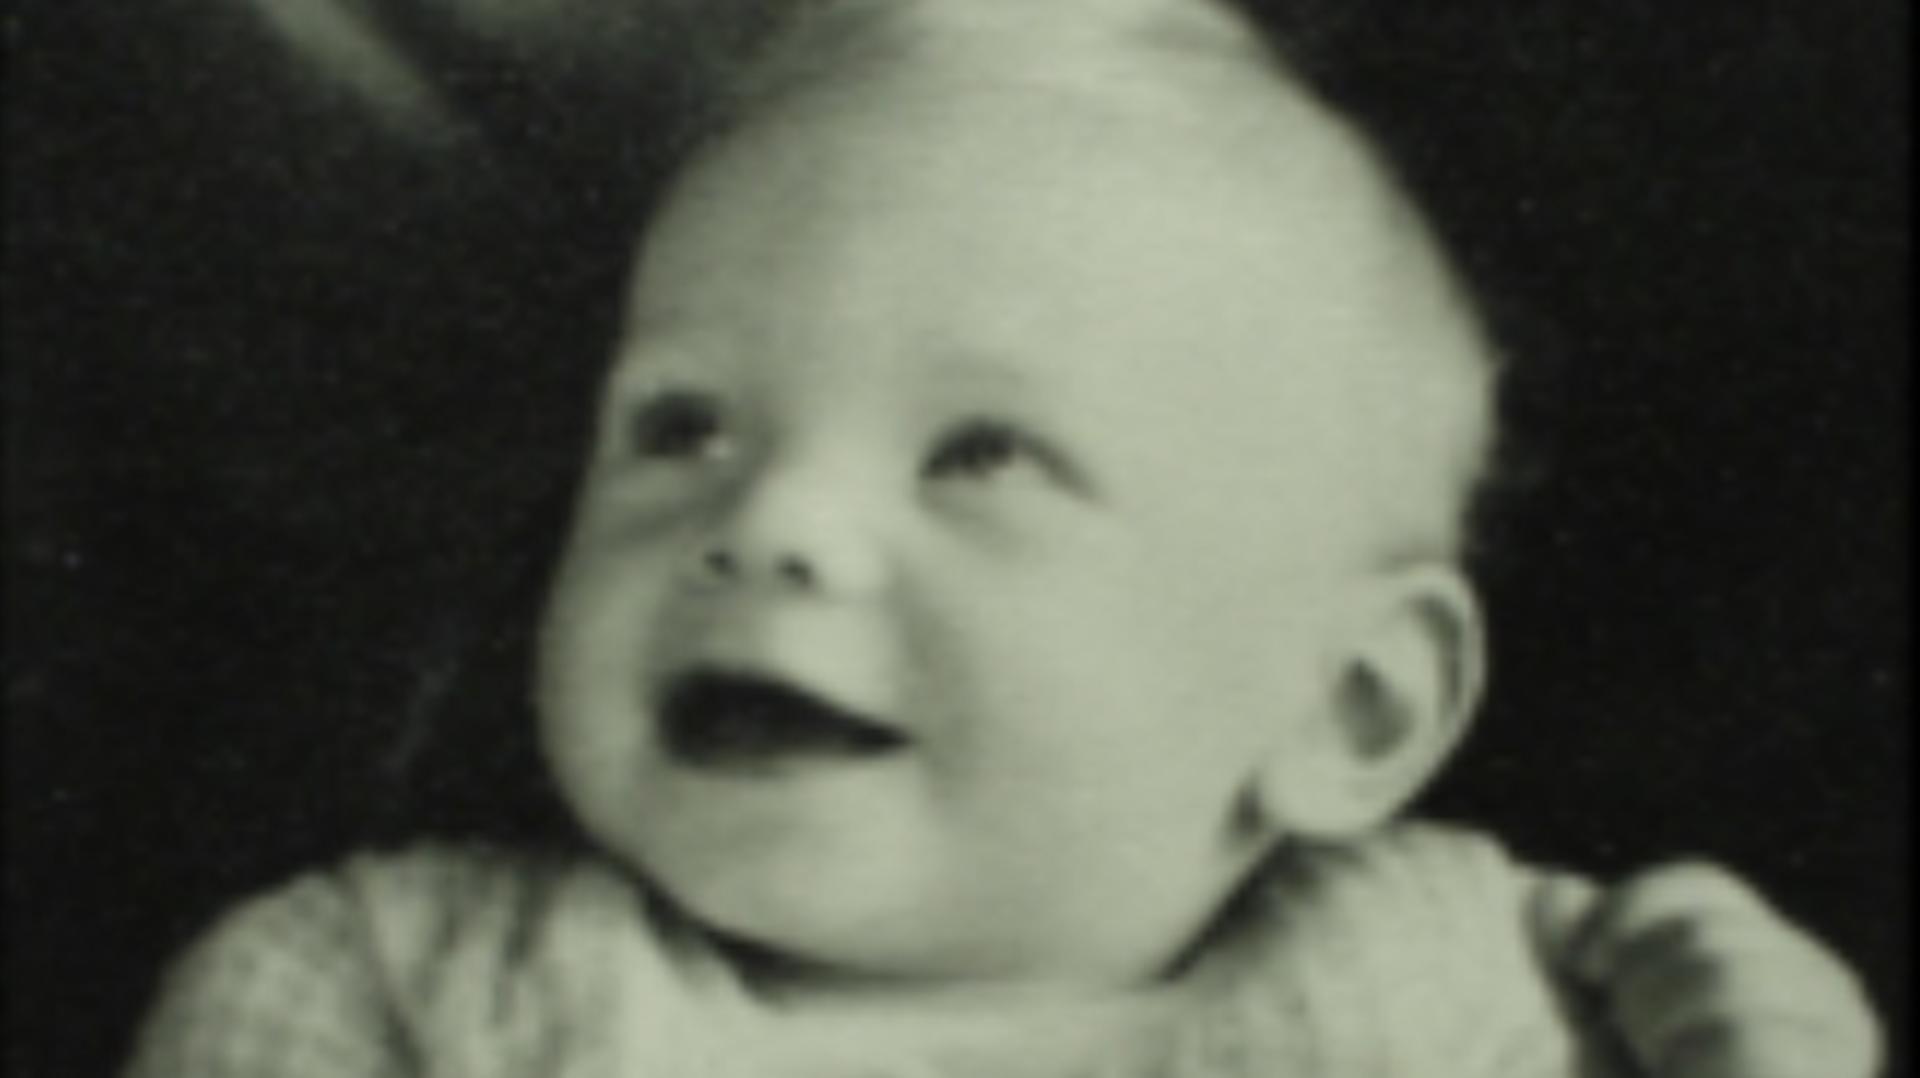 A smiling baby James Dyson